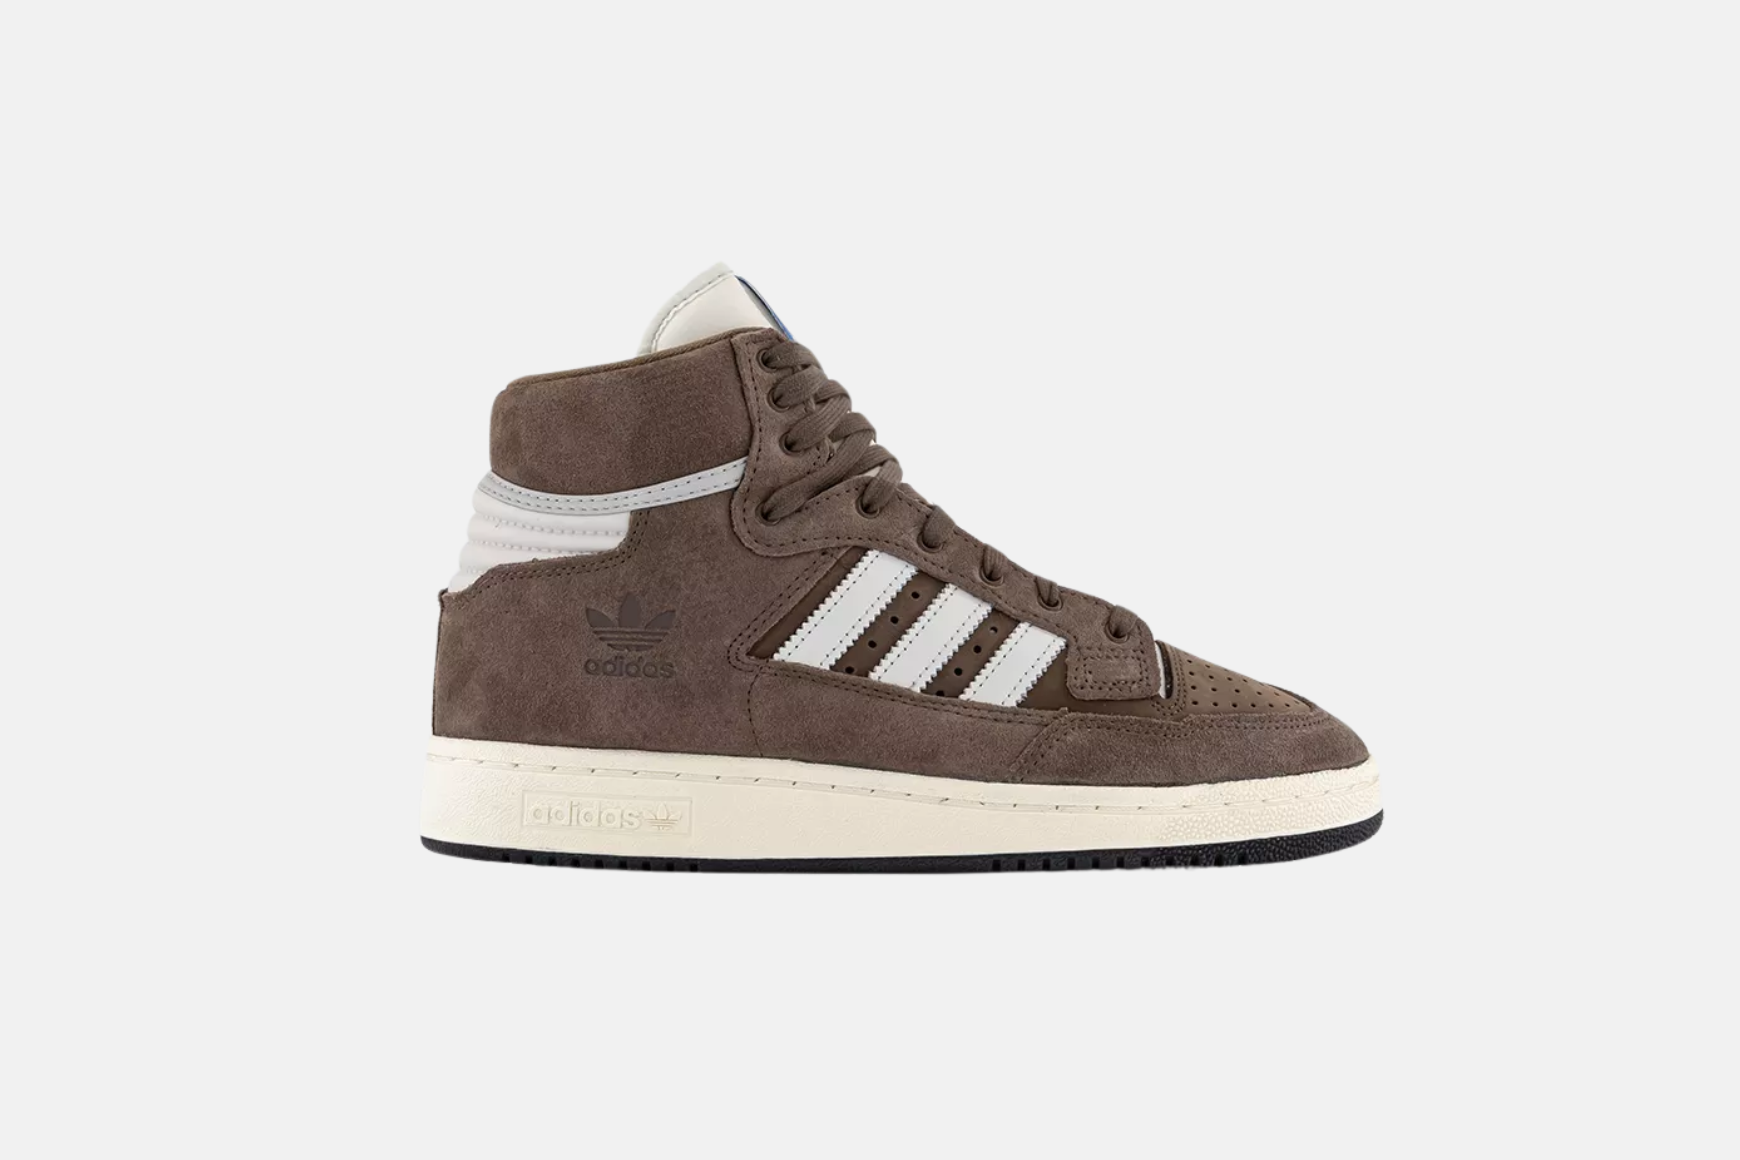 A single Adidas Centennial 85 High Trainer in a Crystal White/Brown colourway